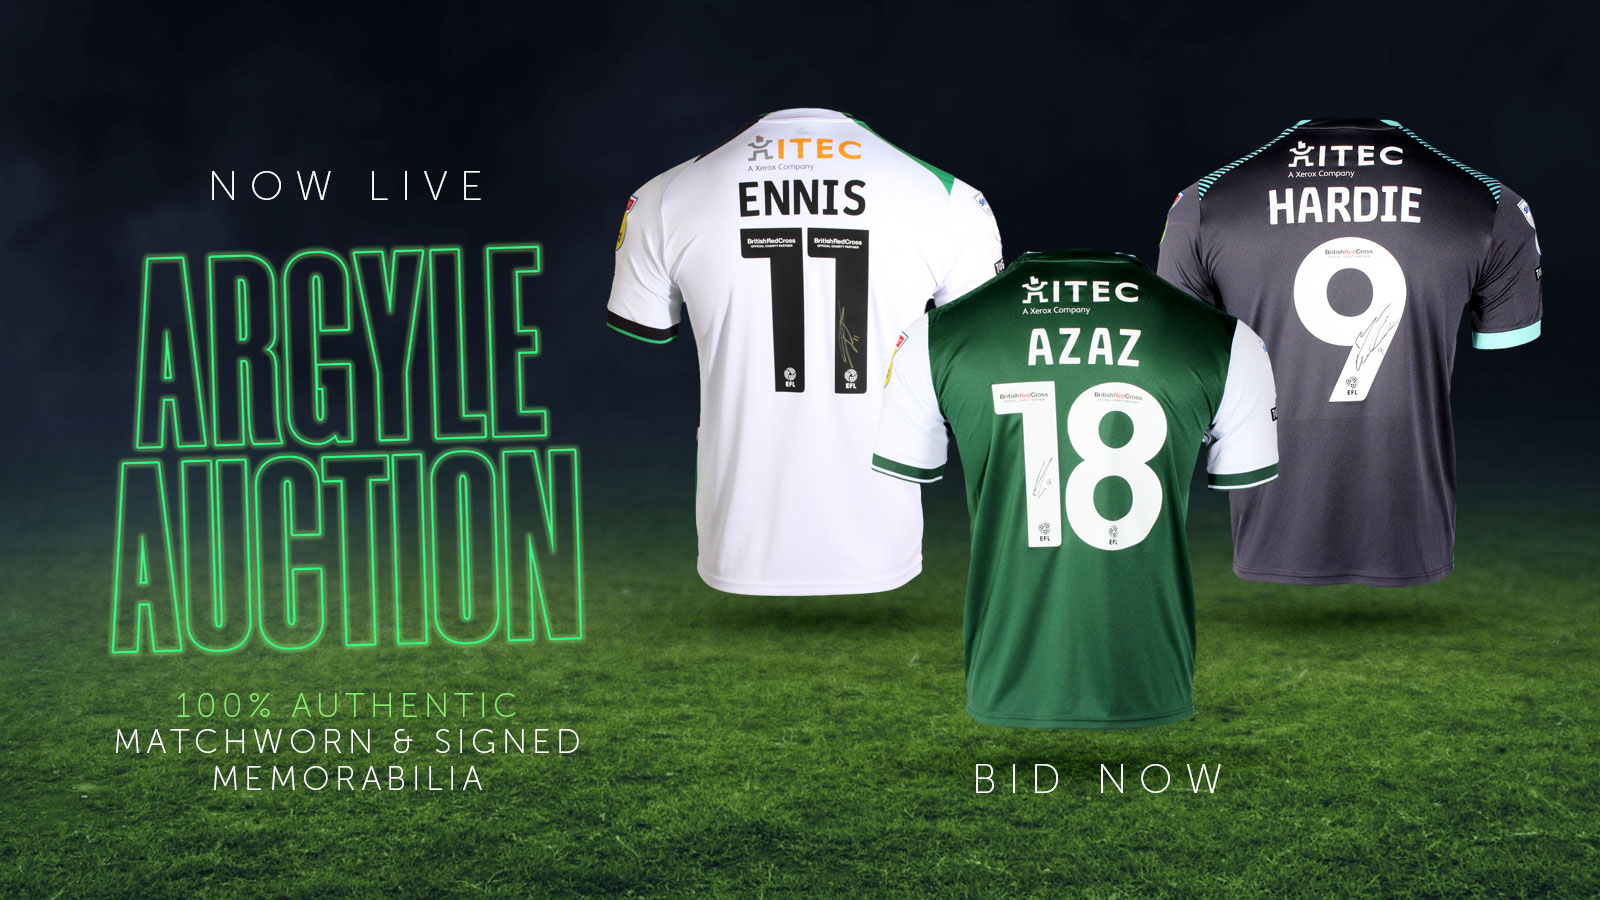 Bid to win with Argyle Auction